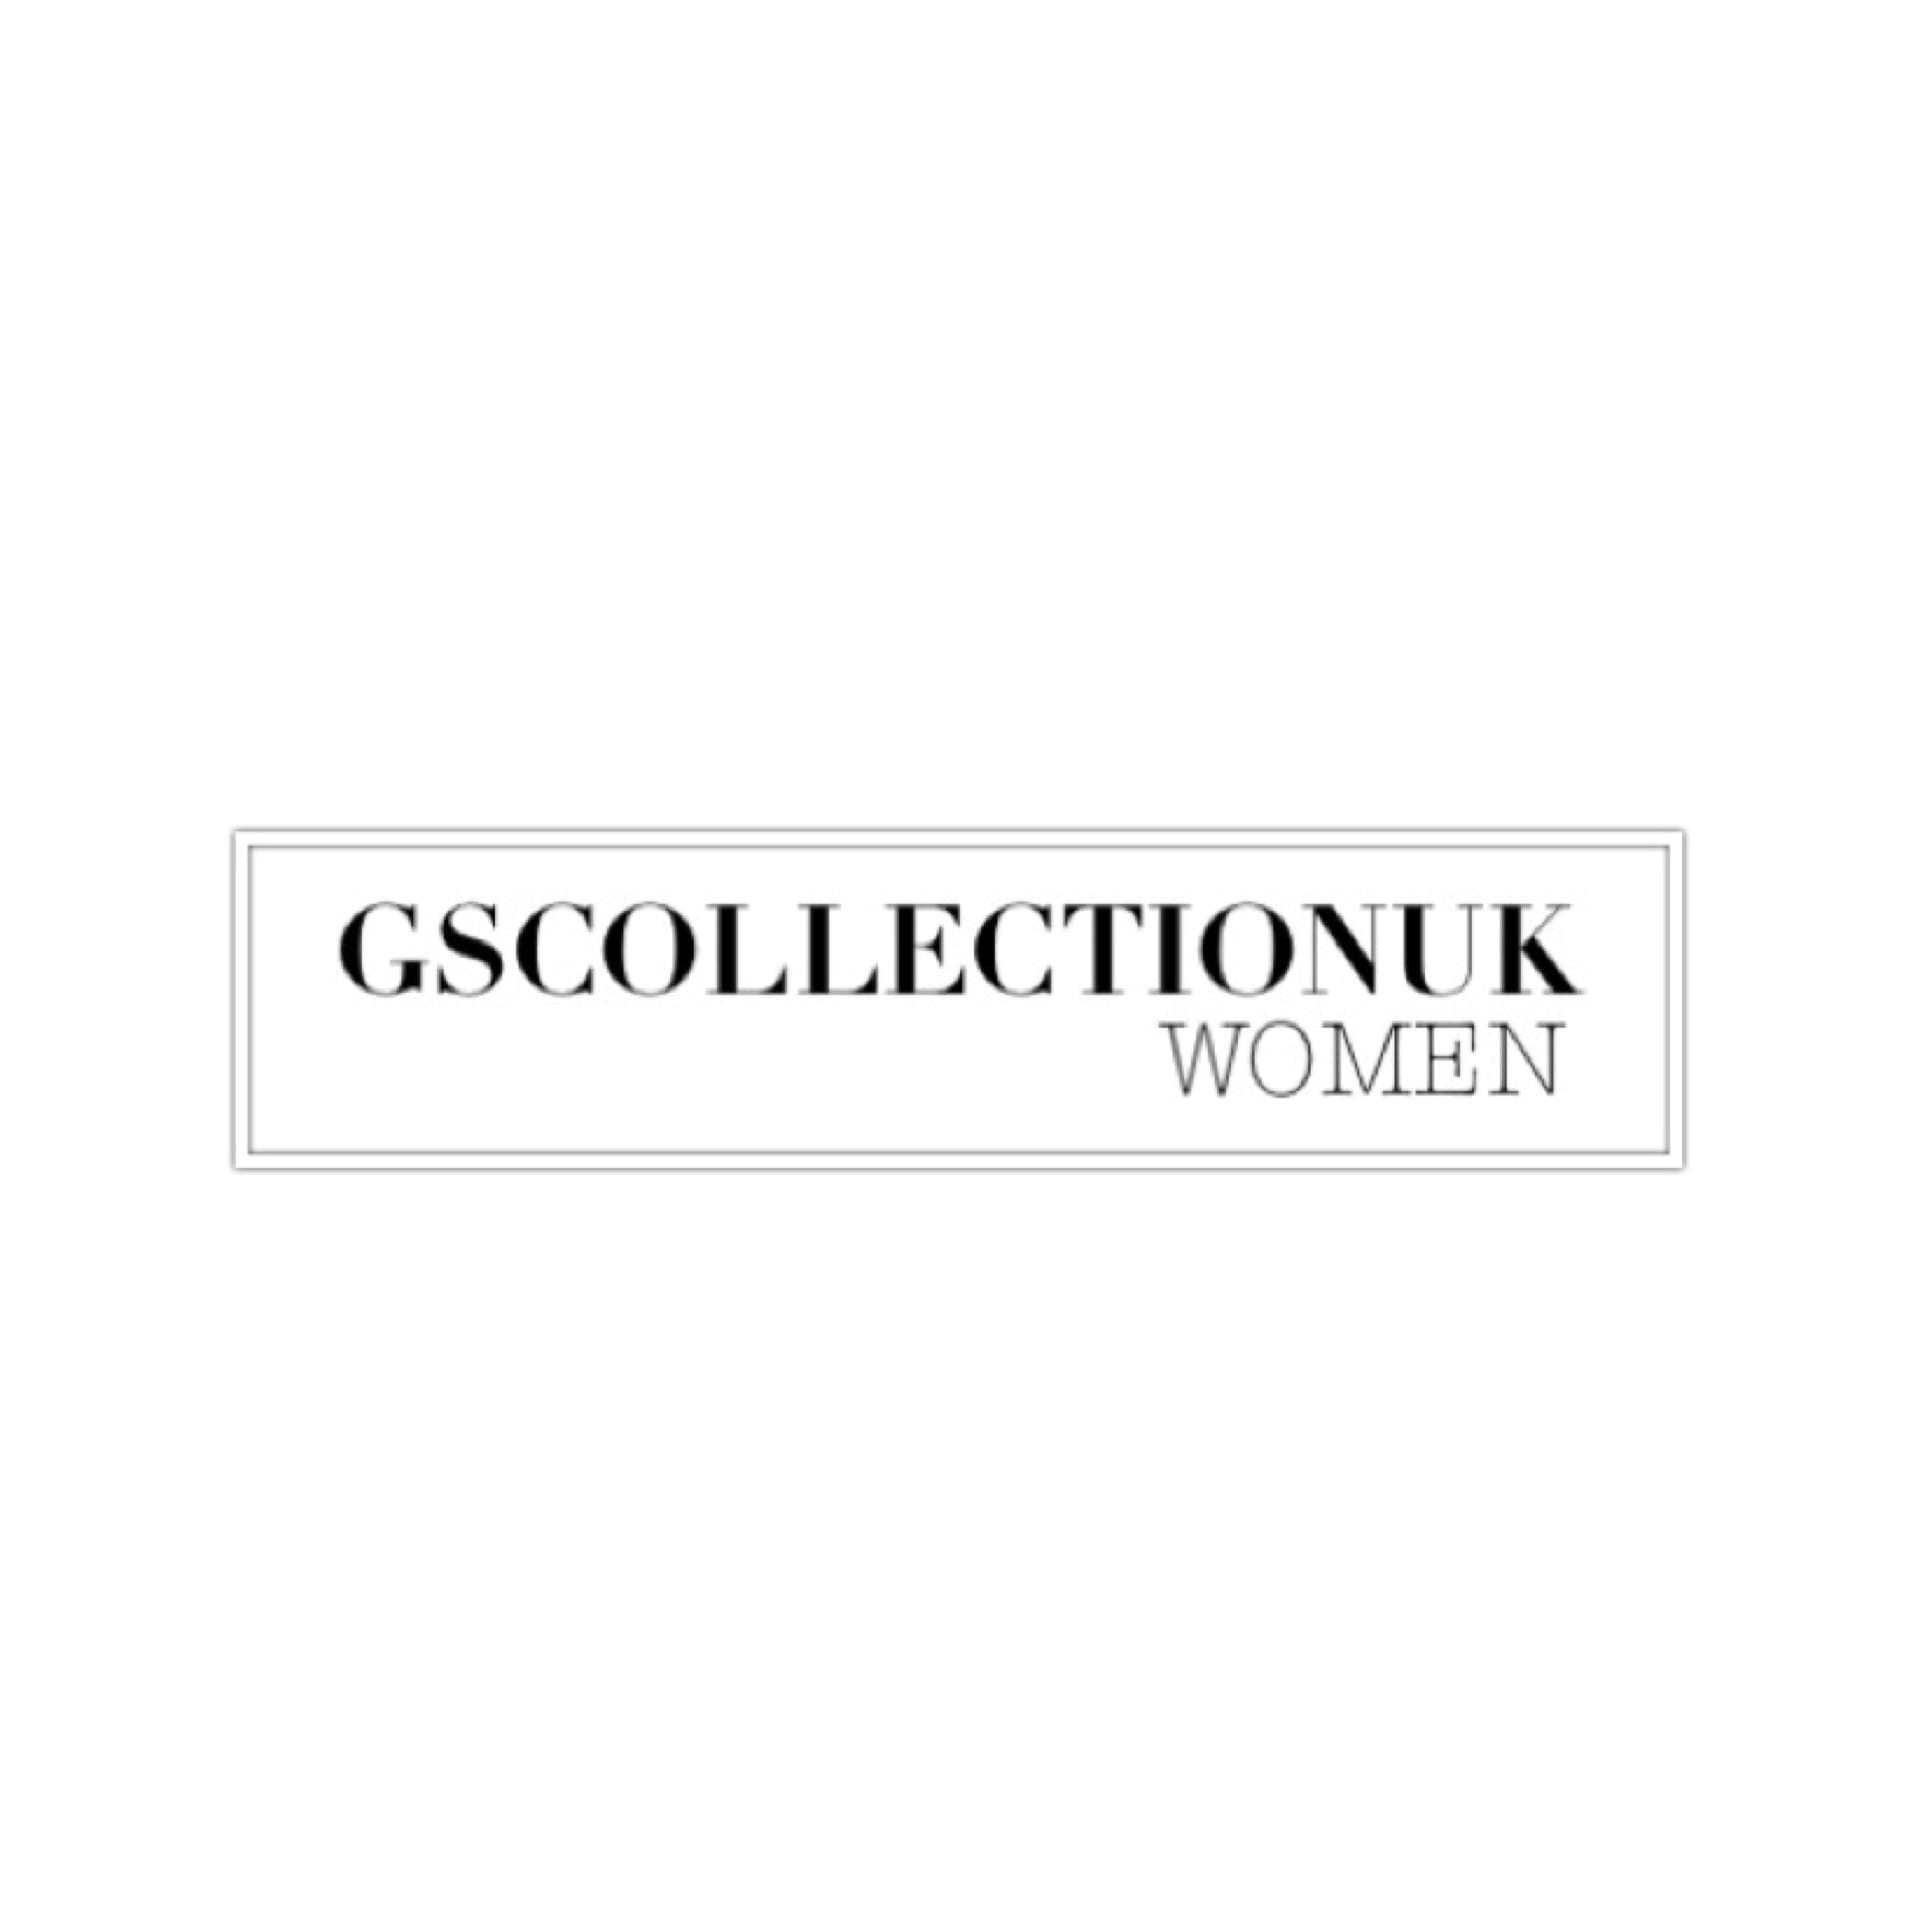 GS Collection UK